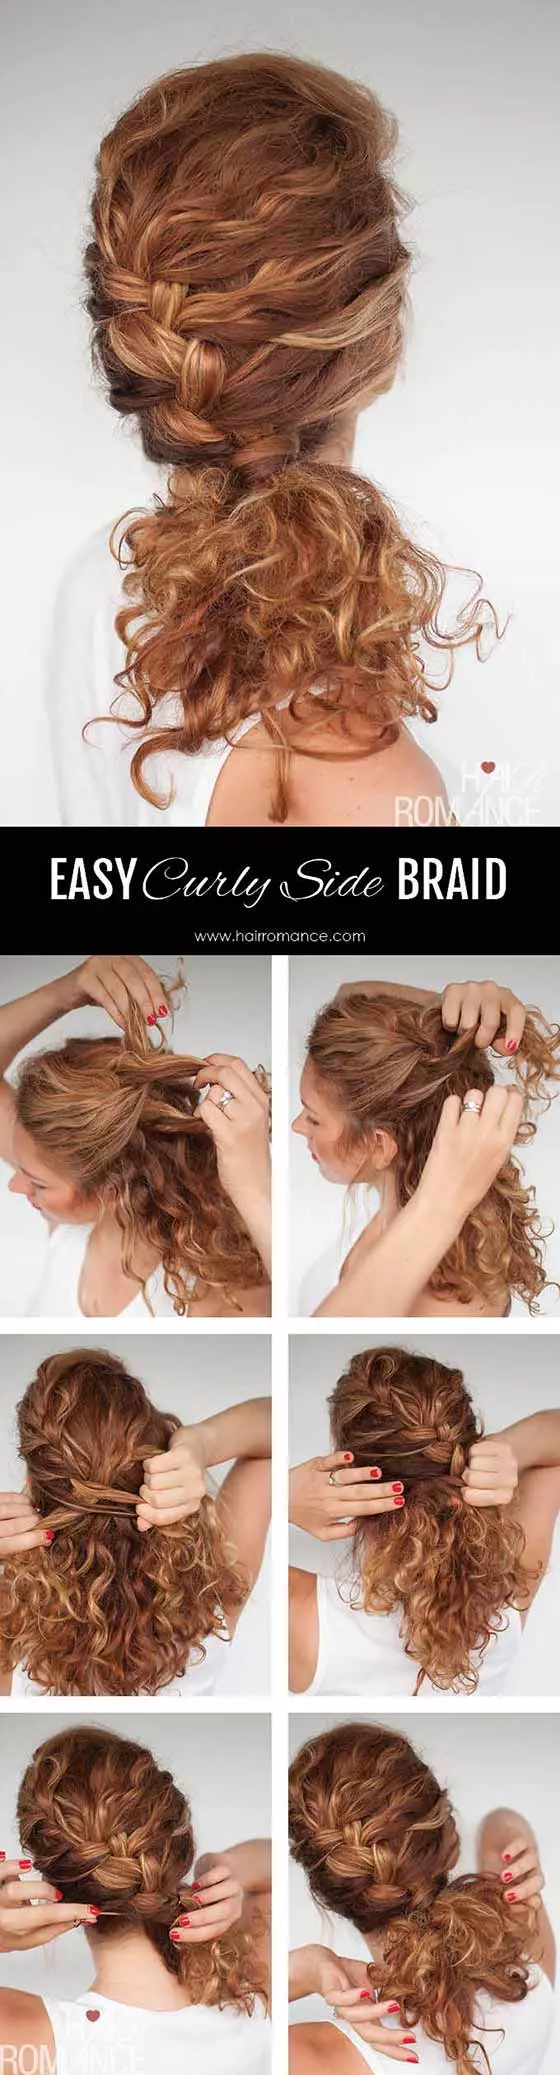 Easy curly side braided hairstyle for long hair